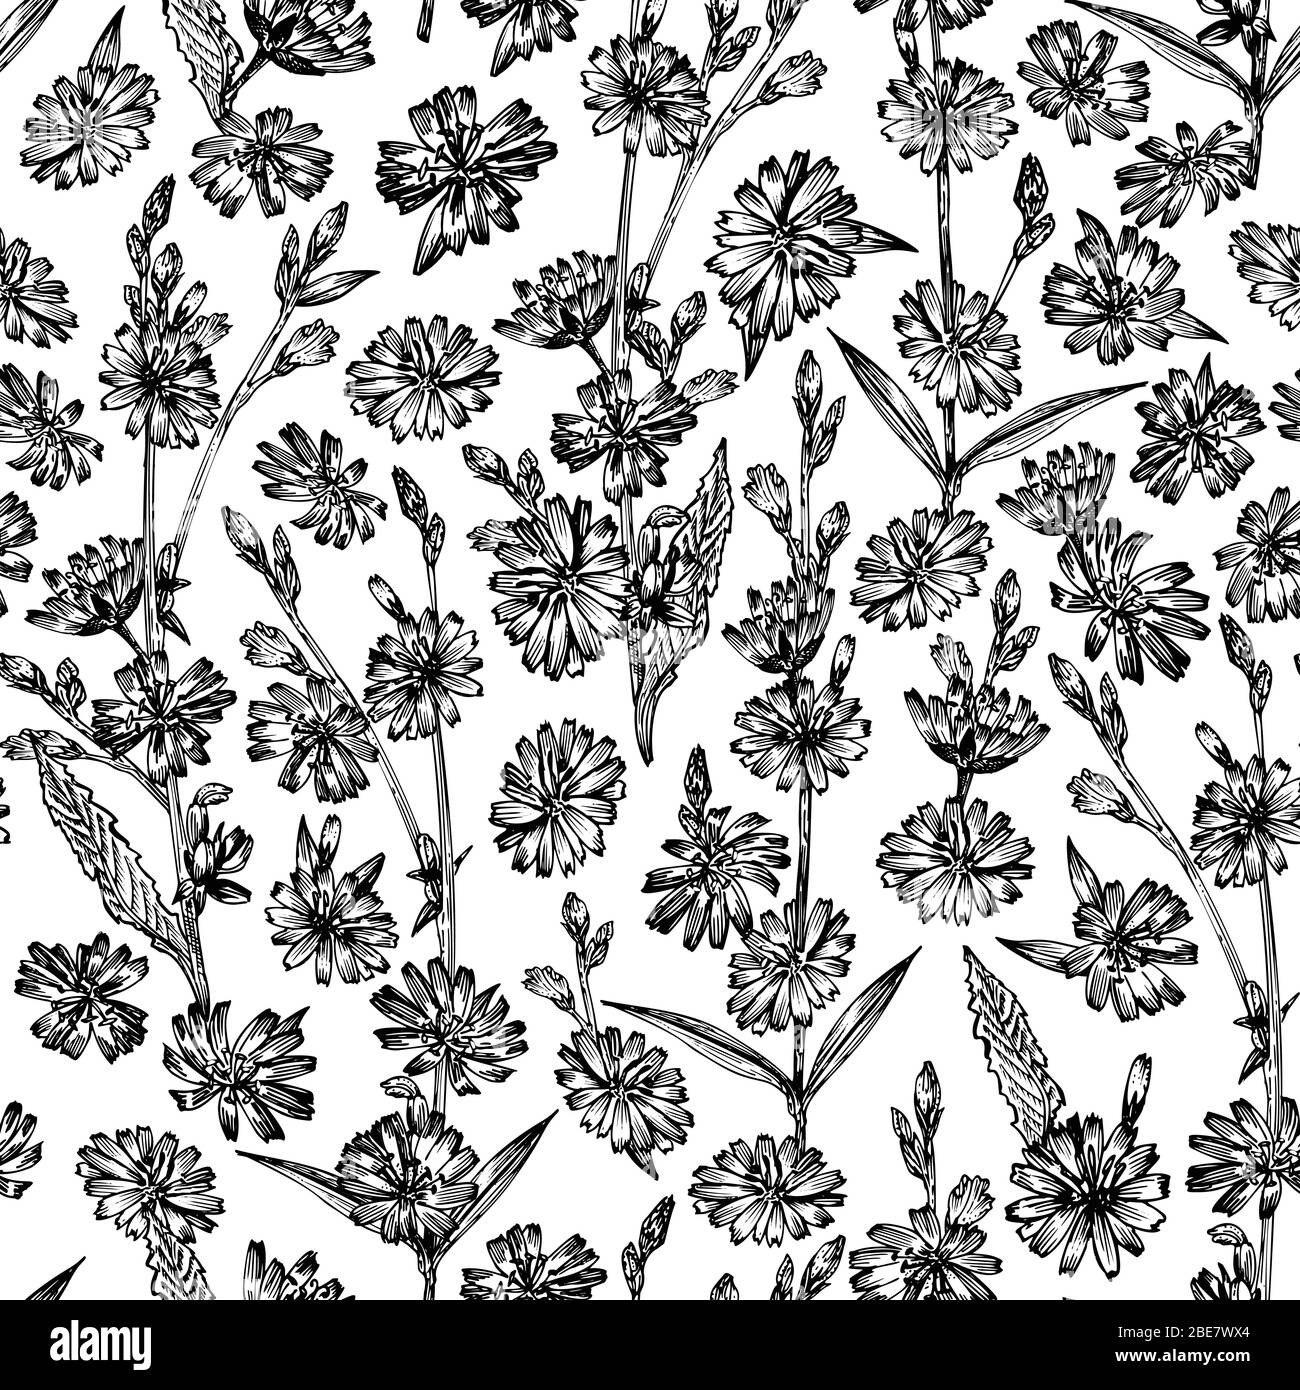 Seamless pattern with Realistic Botanical black ink sketch of chicory flowers, isolated on white background, floral herbs collection. Medicine plant. Stock Vector